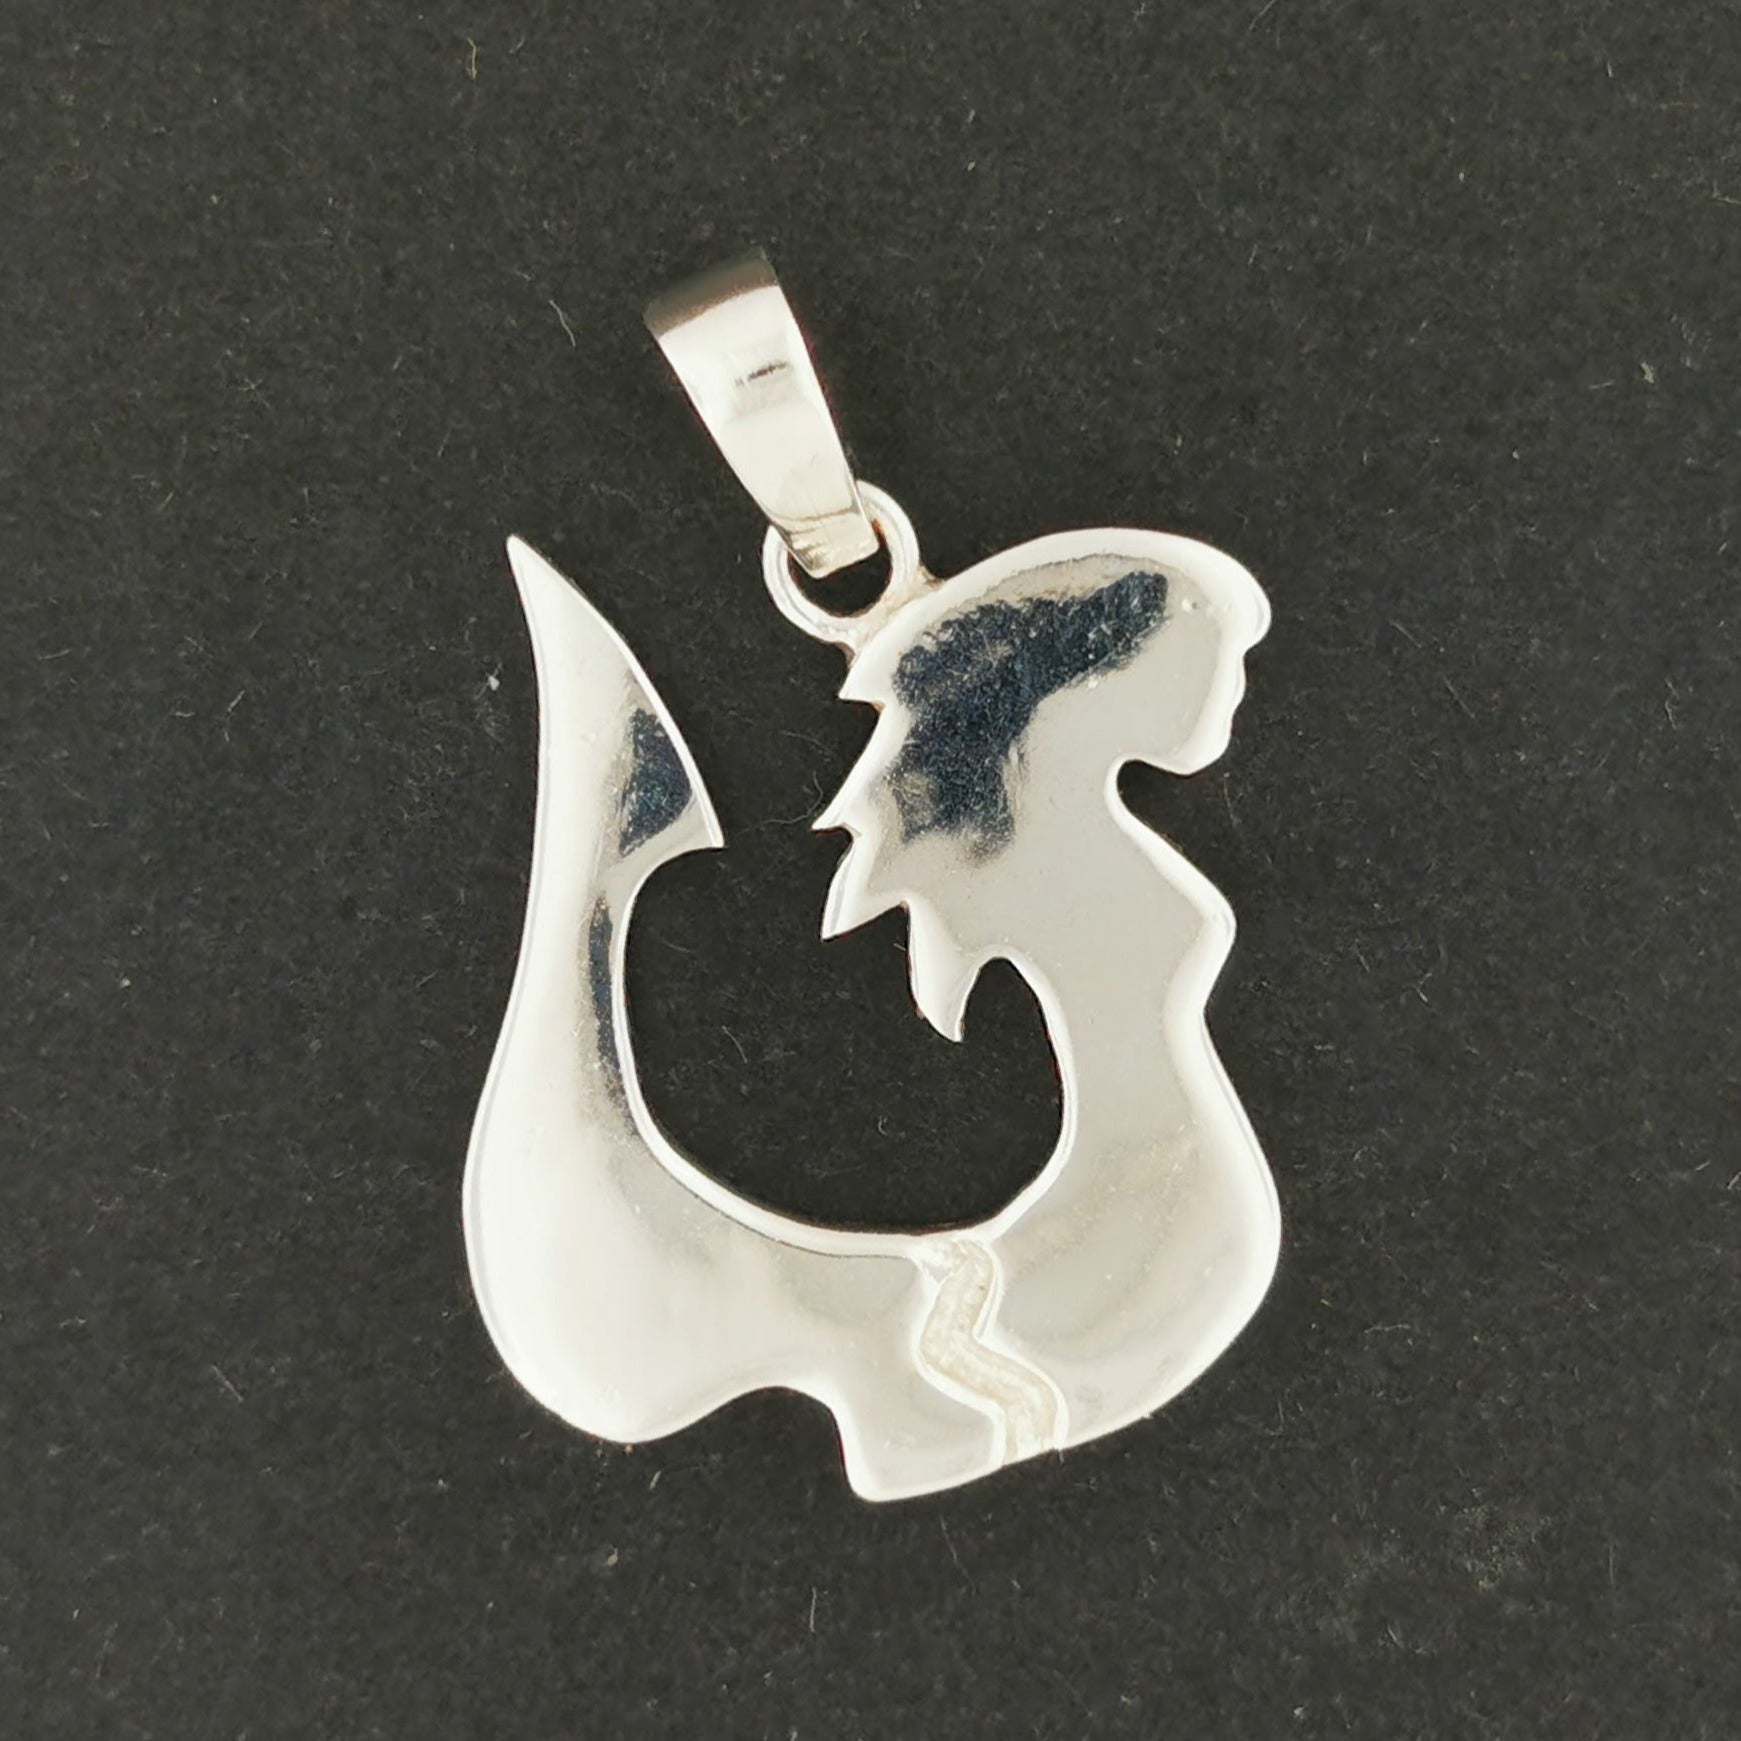 Lamina Scale Pendant in Sterling Silver or Antique Bronze, Fairy Tail Guild Pendant, Sterling Silver Anime Pendant, Fairy Tail Cosplay Jewellery, Fairy Tail Charm, Fairy Tail Pendant, Silver Anime Jewelry, Lamina Scale Pendant, Anime Cosplay Pendant